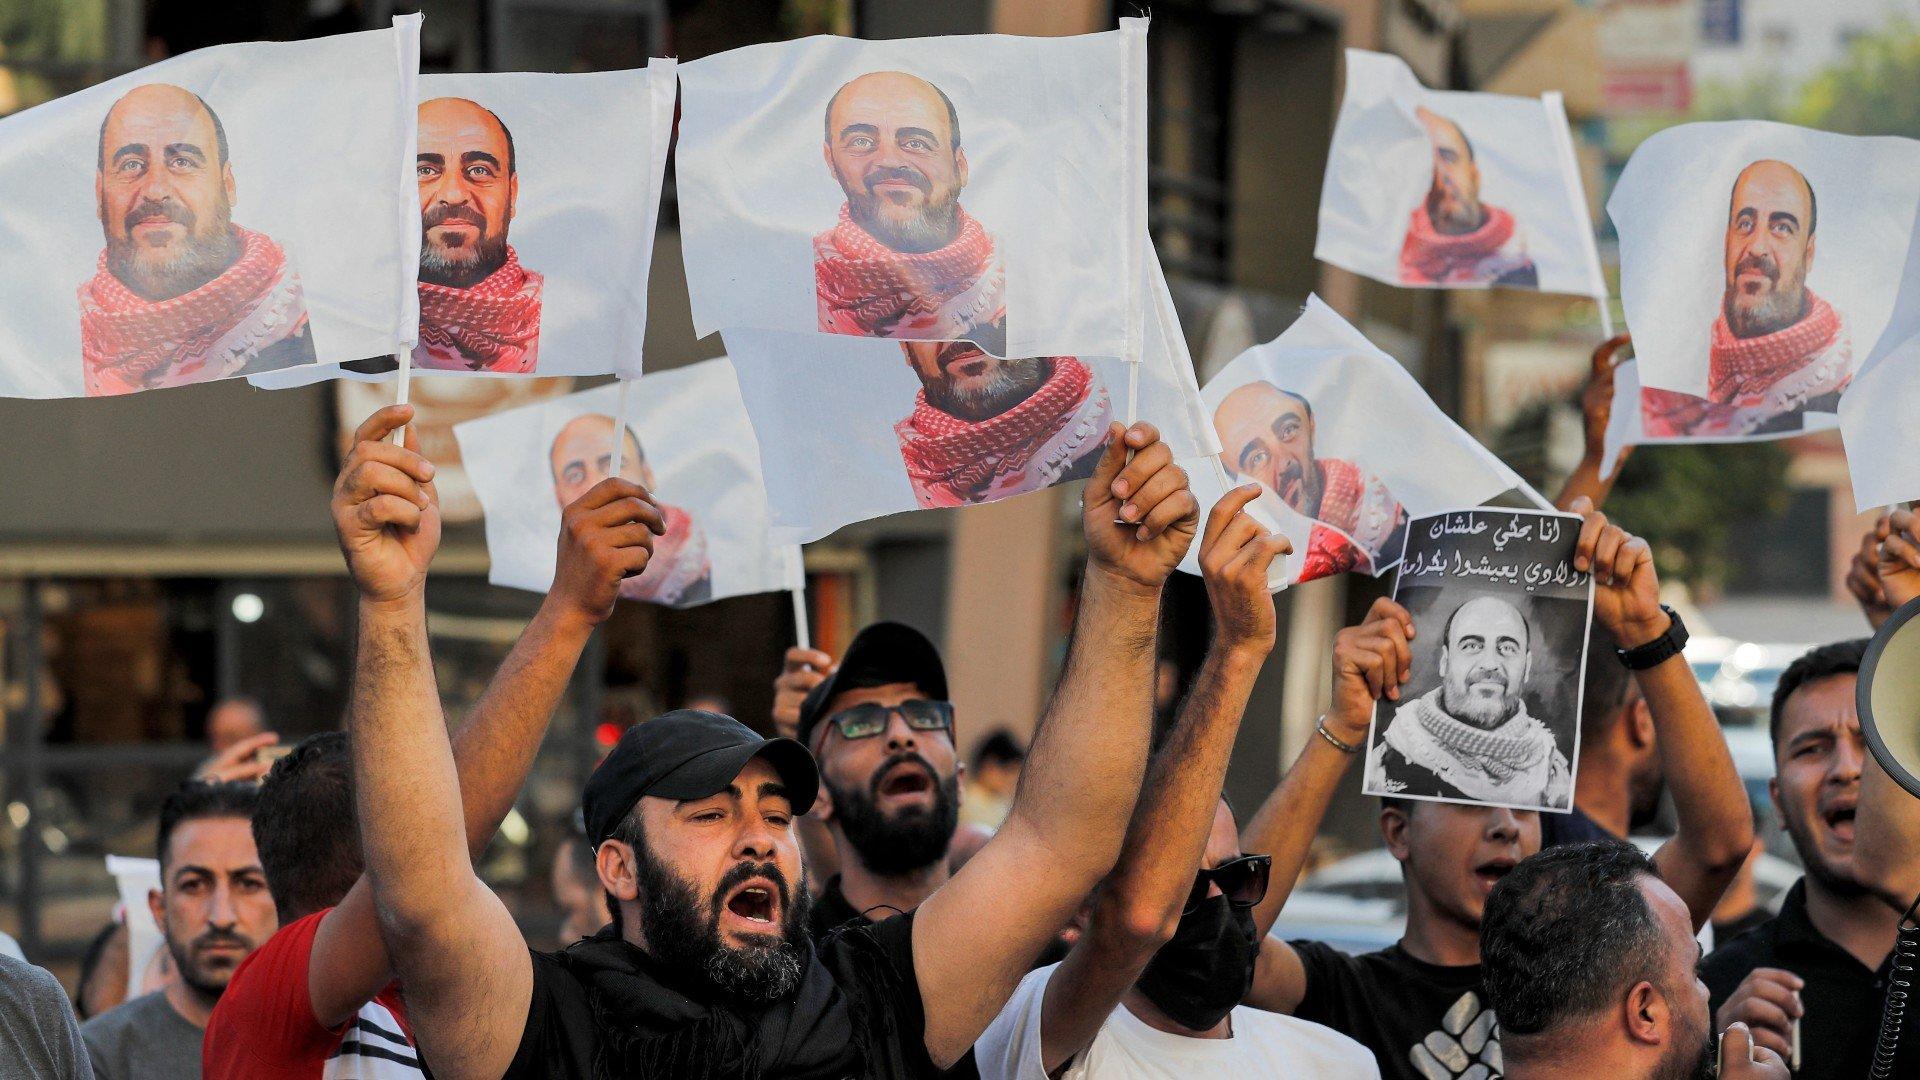 Demonstrators hold up images of murdered Palestinian activist Nizar Banat during a protest in the city of Hebron in the occupied West Bank on 13 July 2021 (AFP)